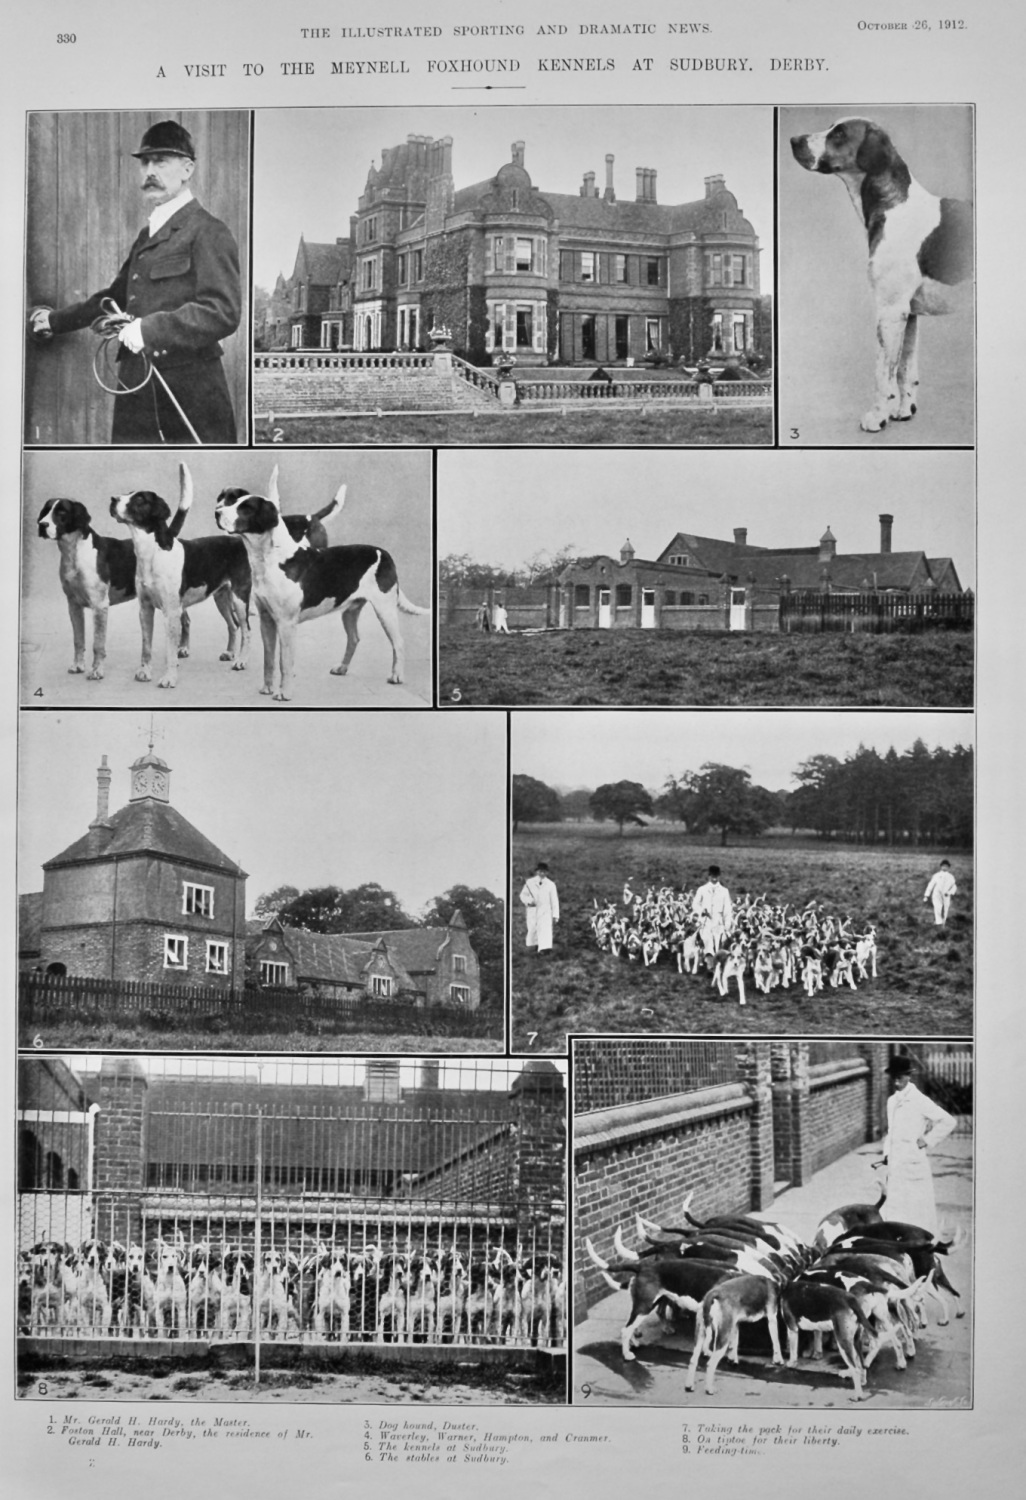 A Visit to the Meynell Foxhound Kennels at Sudbury, Derby.  1912.